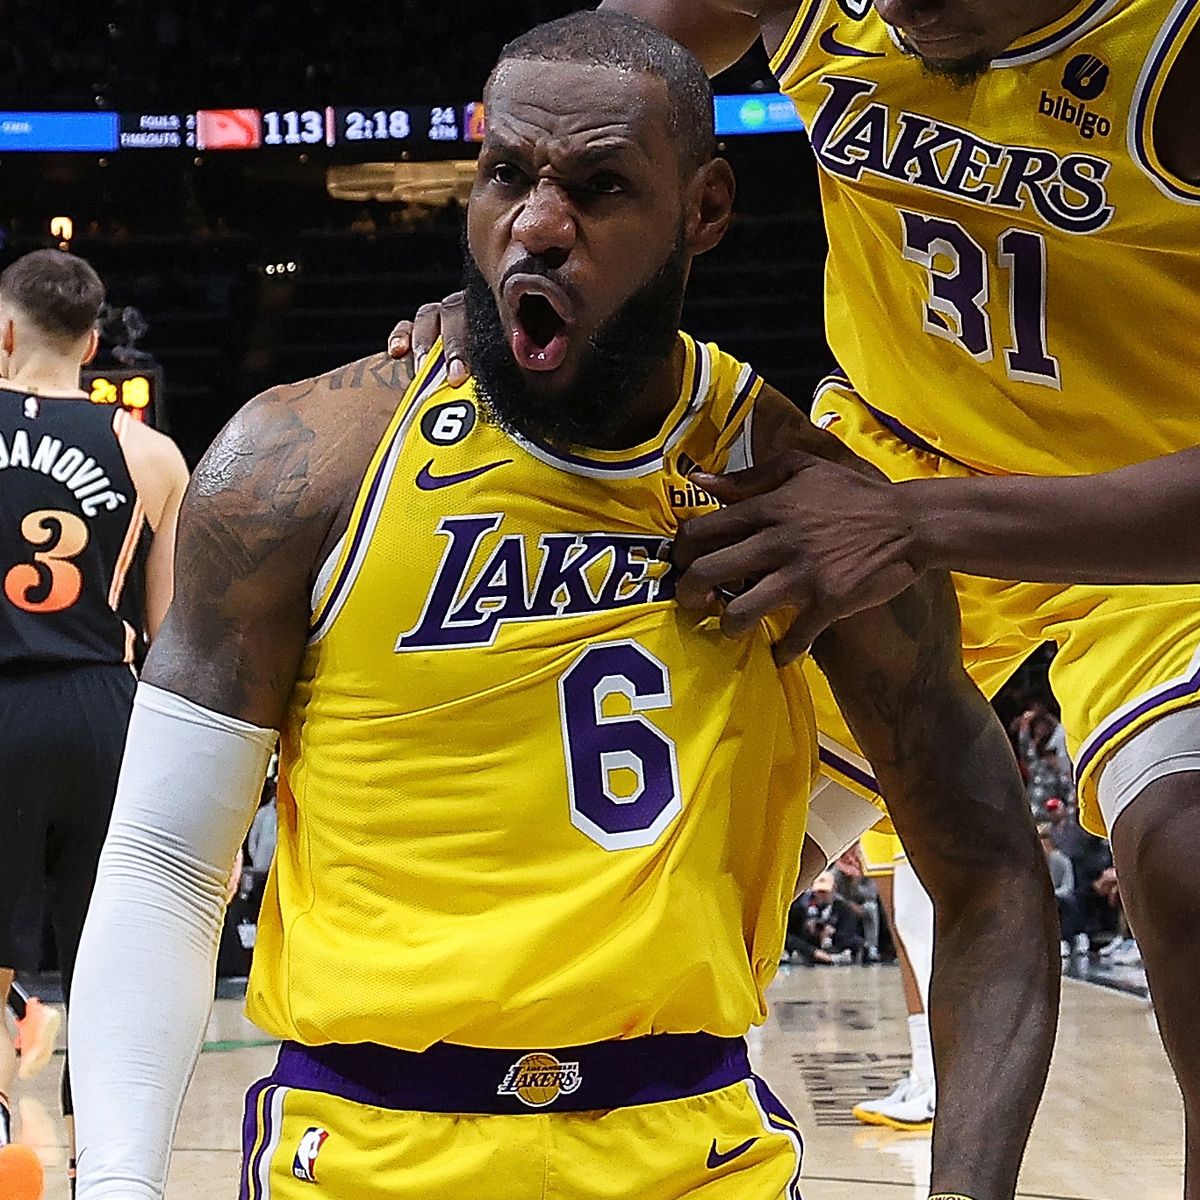 LeBron James the 7th Laker with multiple 50-point games